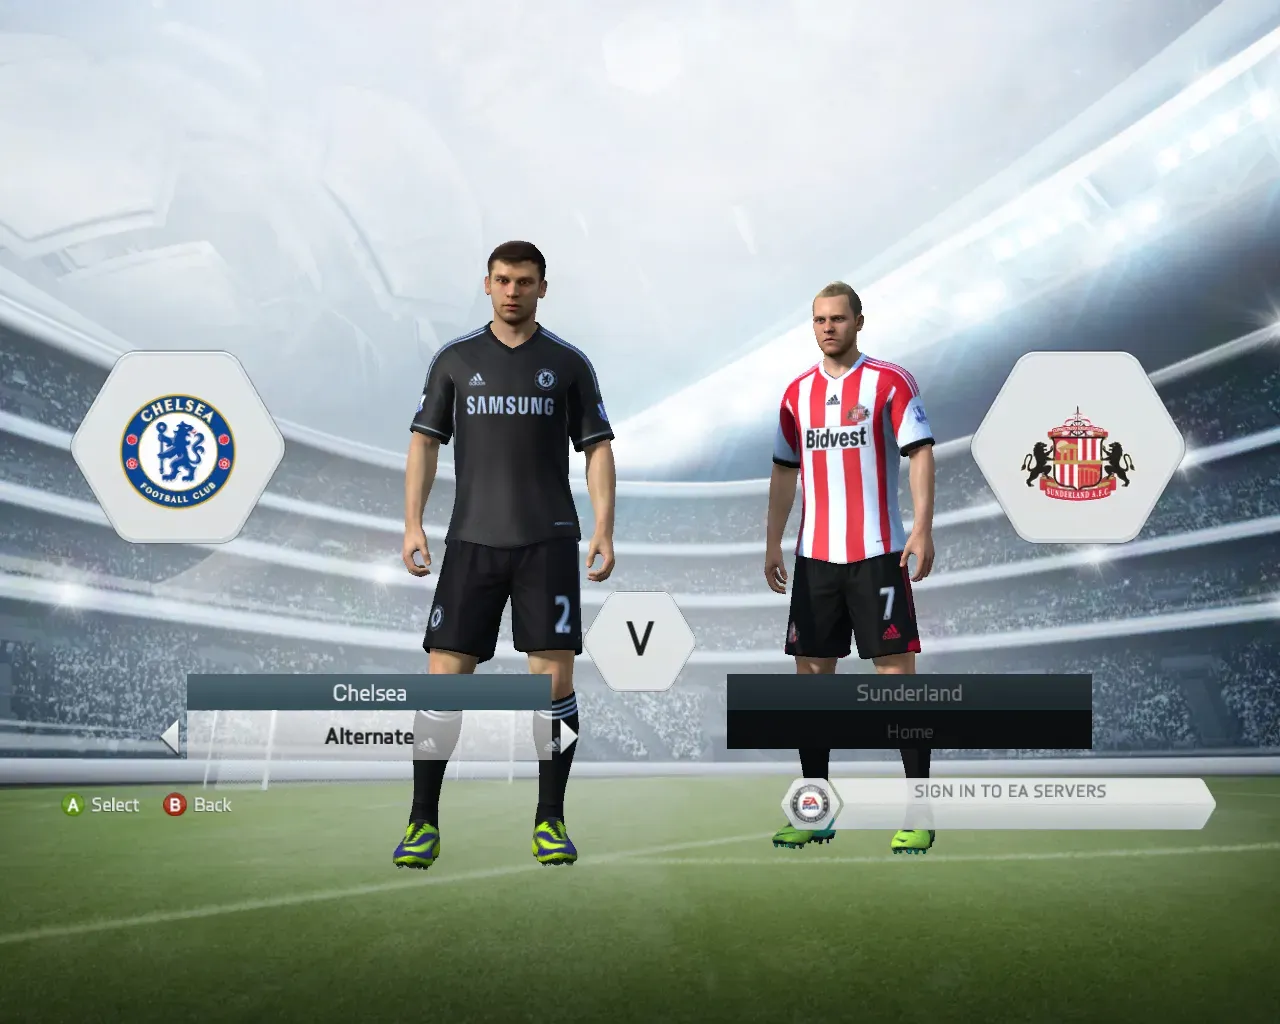 FIFA 14: Ultimate Edition for Windows 10